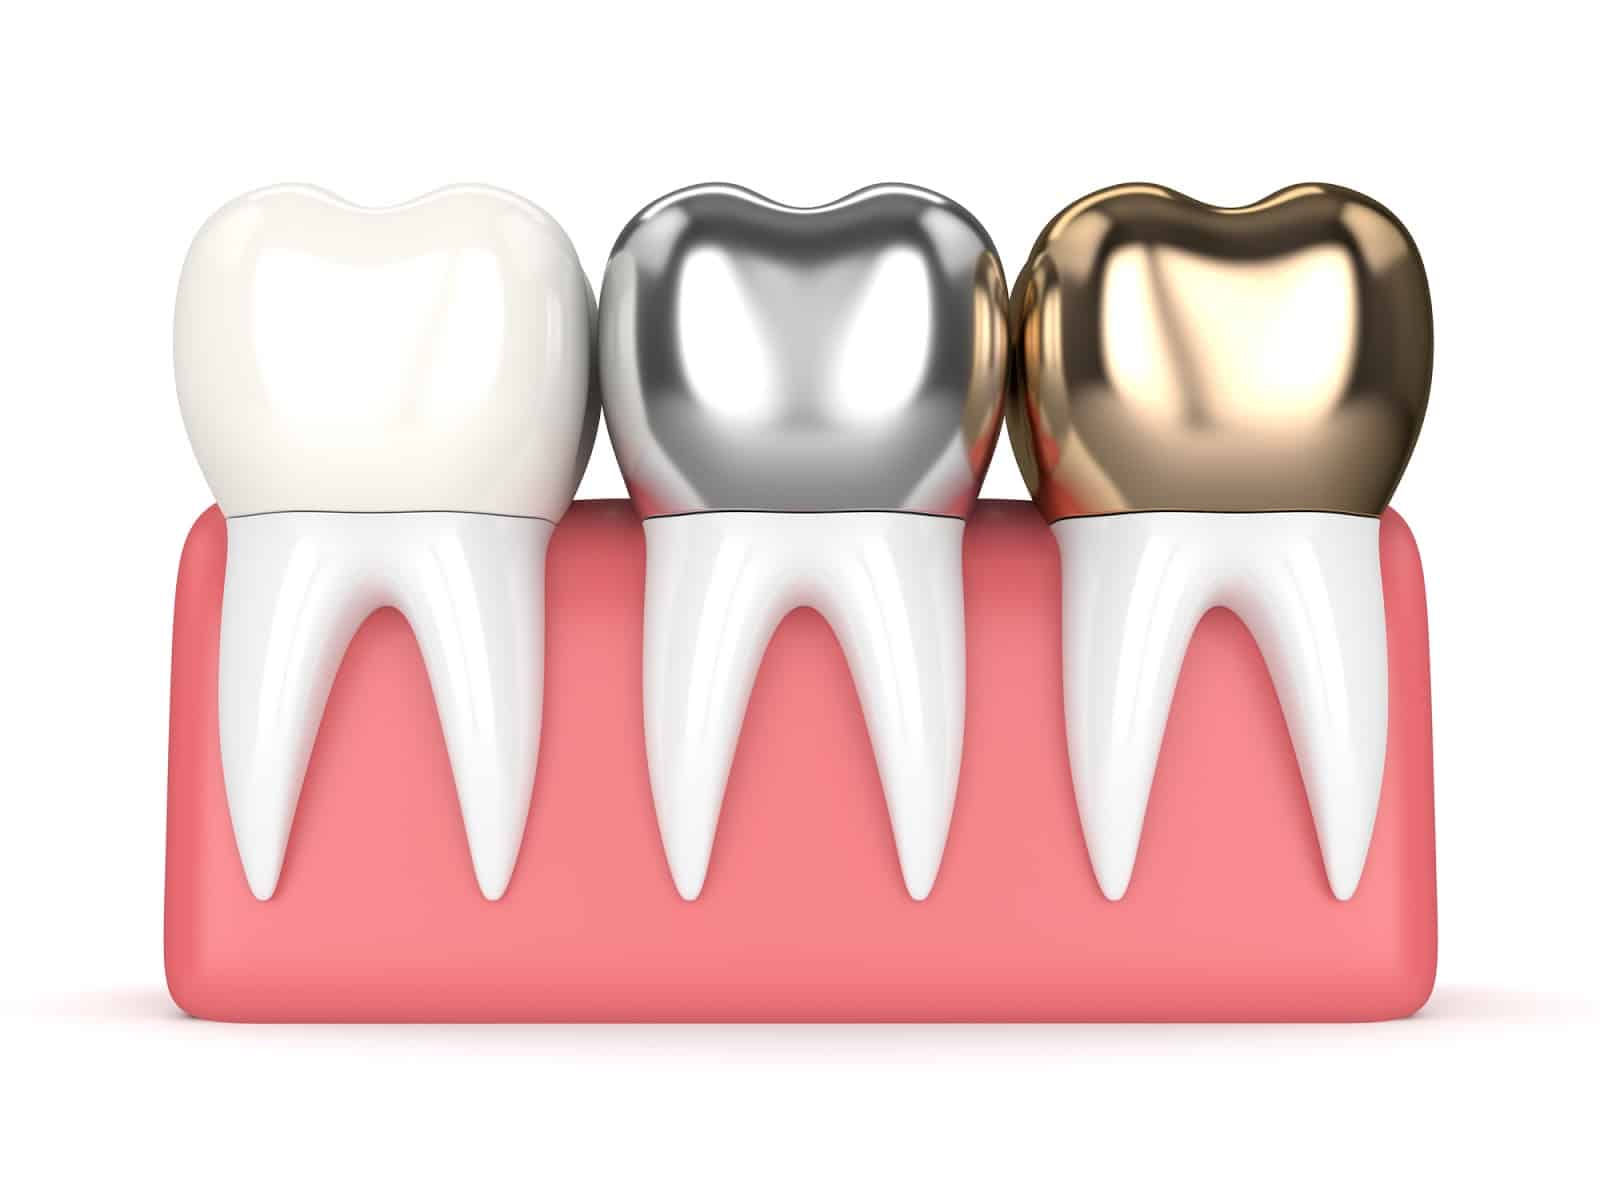 3d render of teeth with gold, amalgam and composite dental crown in gums over white background